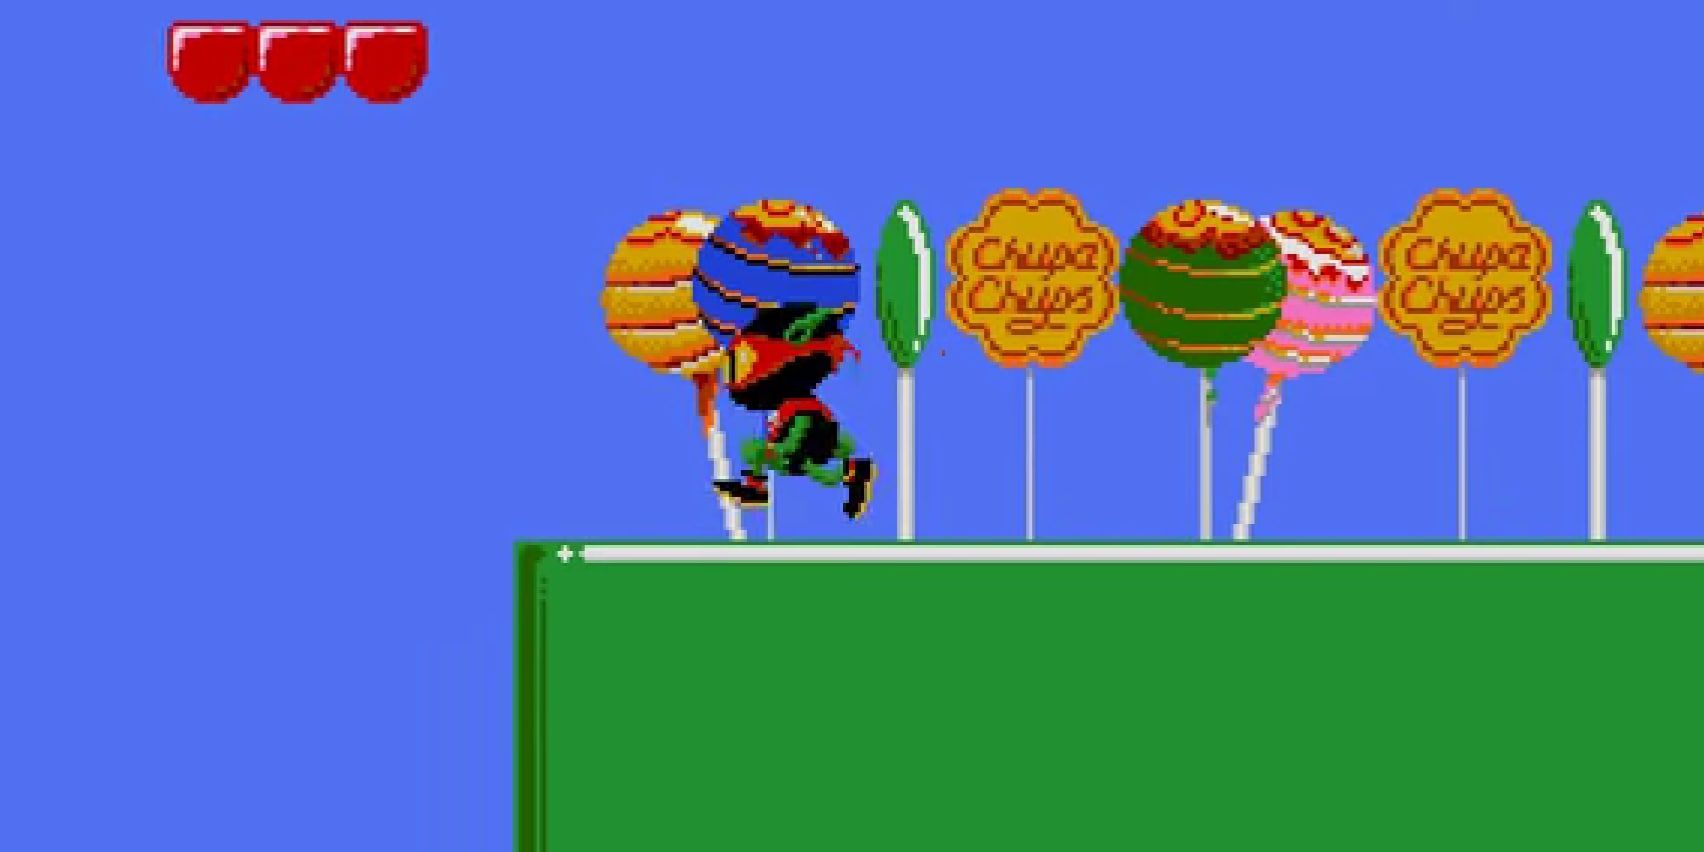 The titular character walking past a series of lollipops with the Chupa Chups wrapper and the brand logo on a platform.